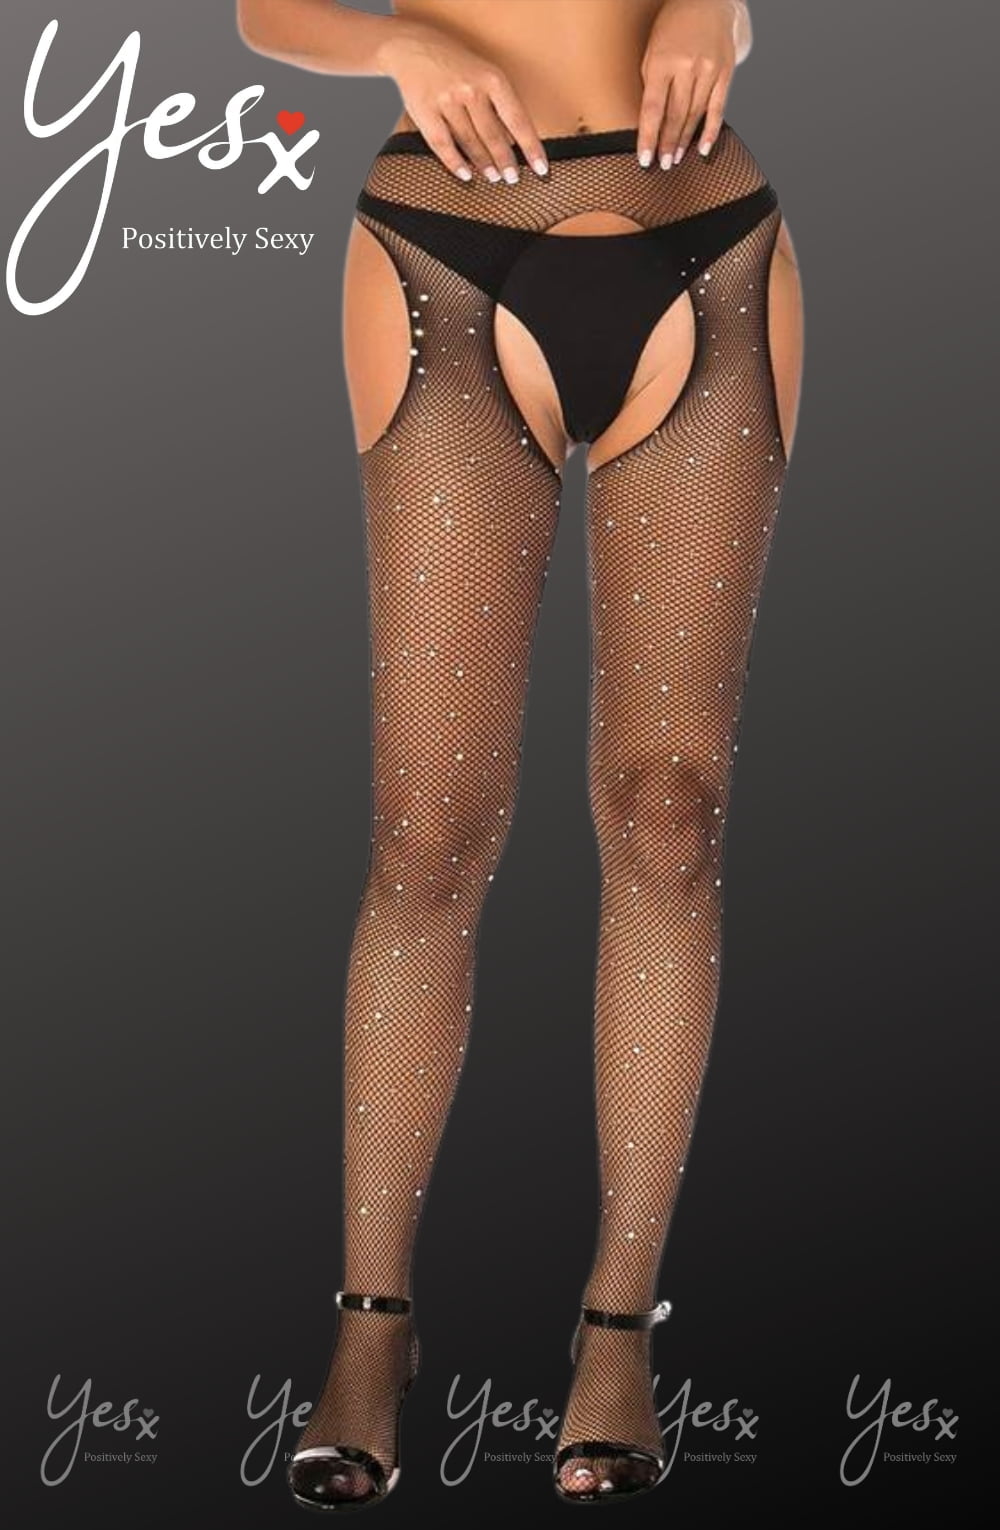 Sparkly black fishnet stockings with rhinestone details from the YesX YX850 collection, perfect for an elegant and alluring intimate style.